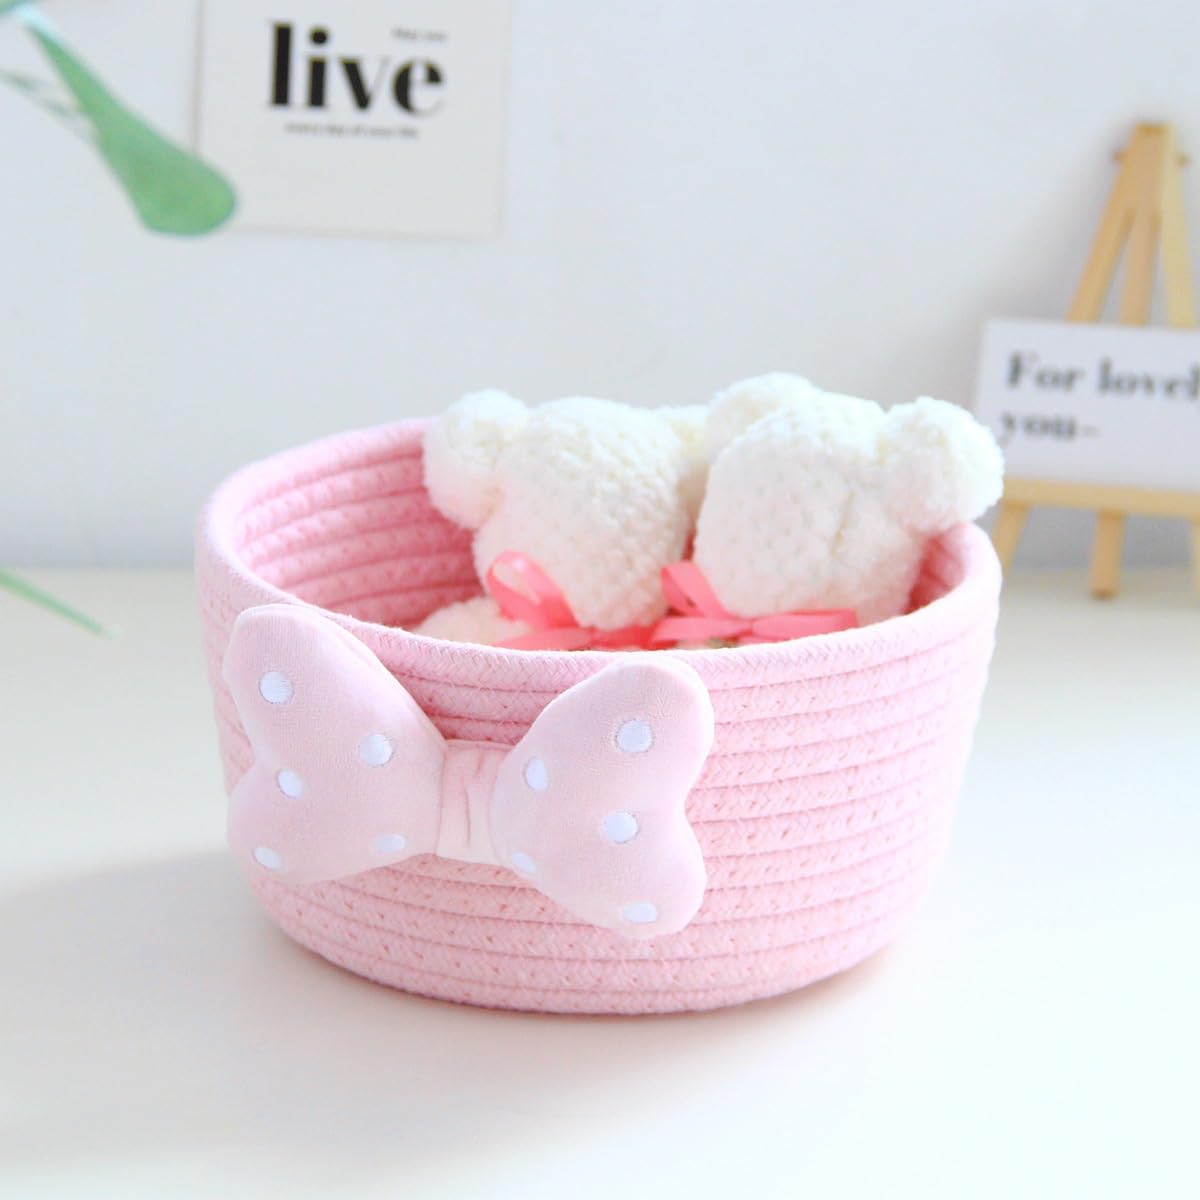 Kamuavni Decorative Storage Baskets Cartoon Woven Baskets for Home Decor and Organizing Small Shelf Baskets for Gilrs/Women Makeup Storage Basket -2 Pack,Pink